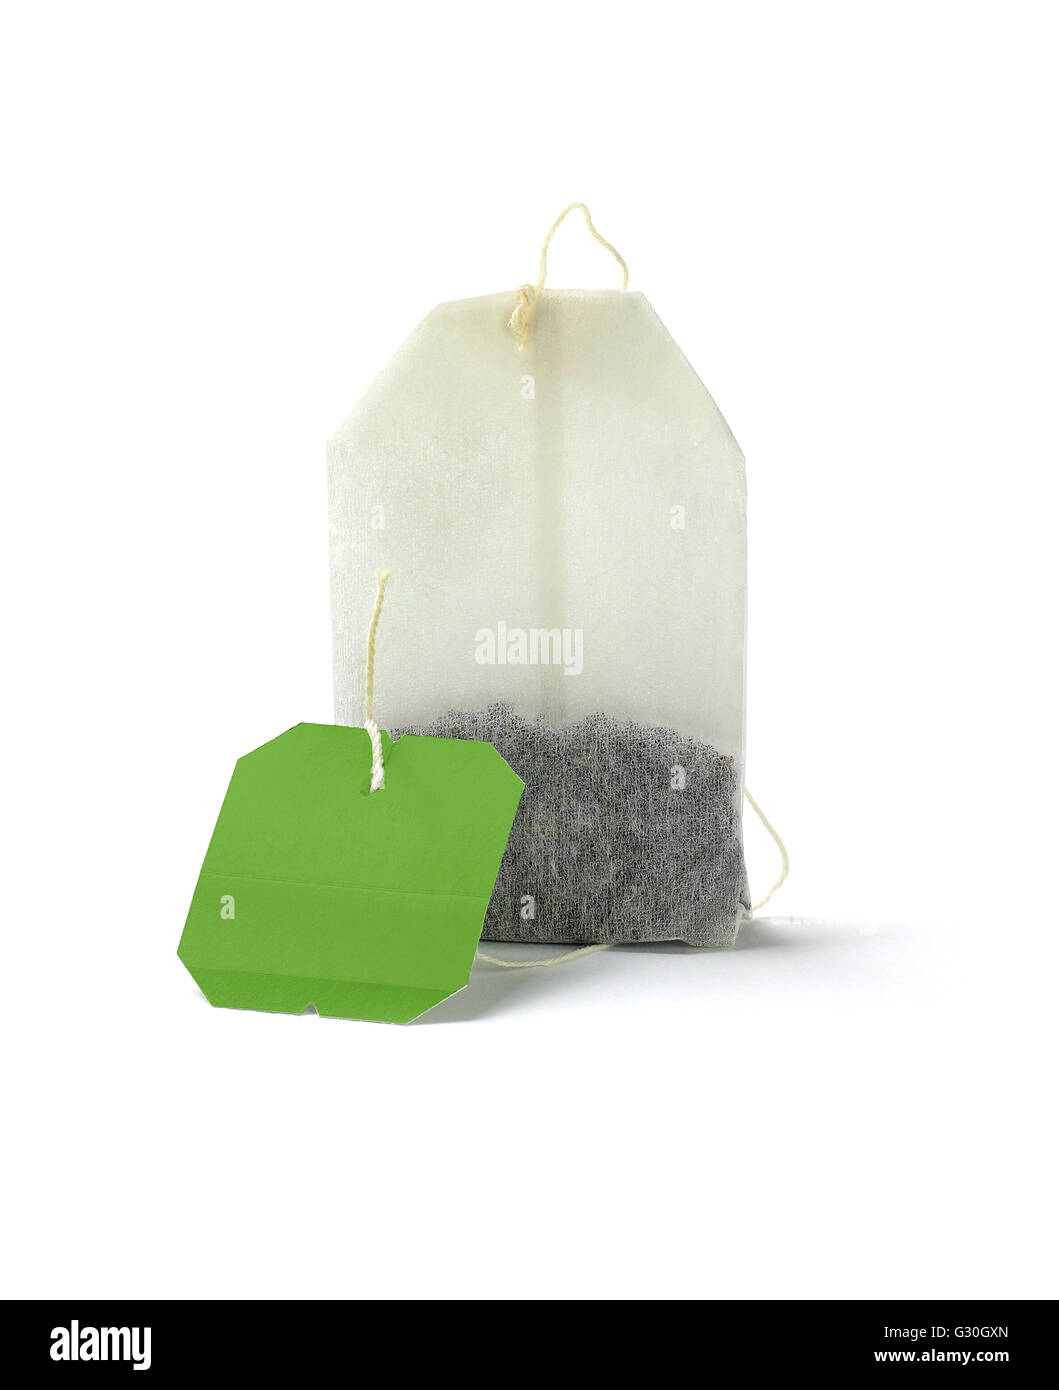 Green Tea Bag With Blank Label on White Background Stock Photo